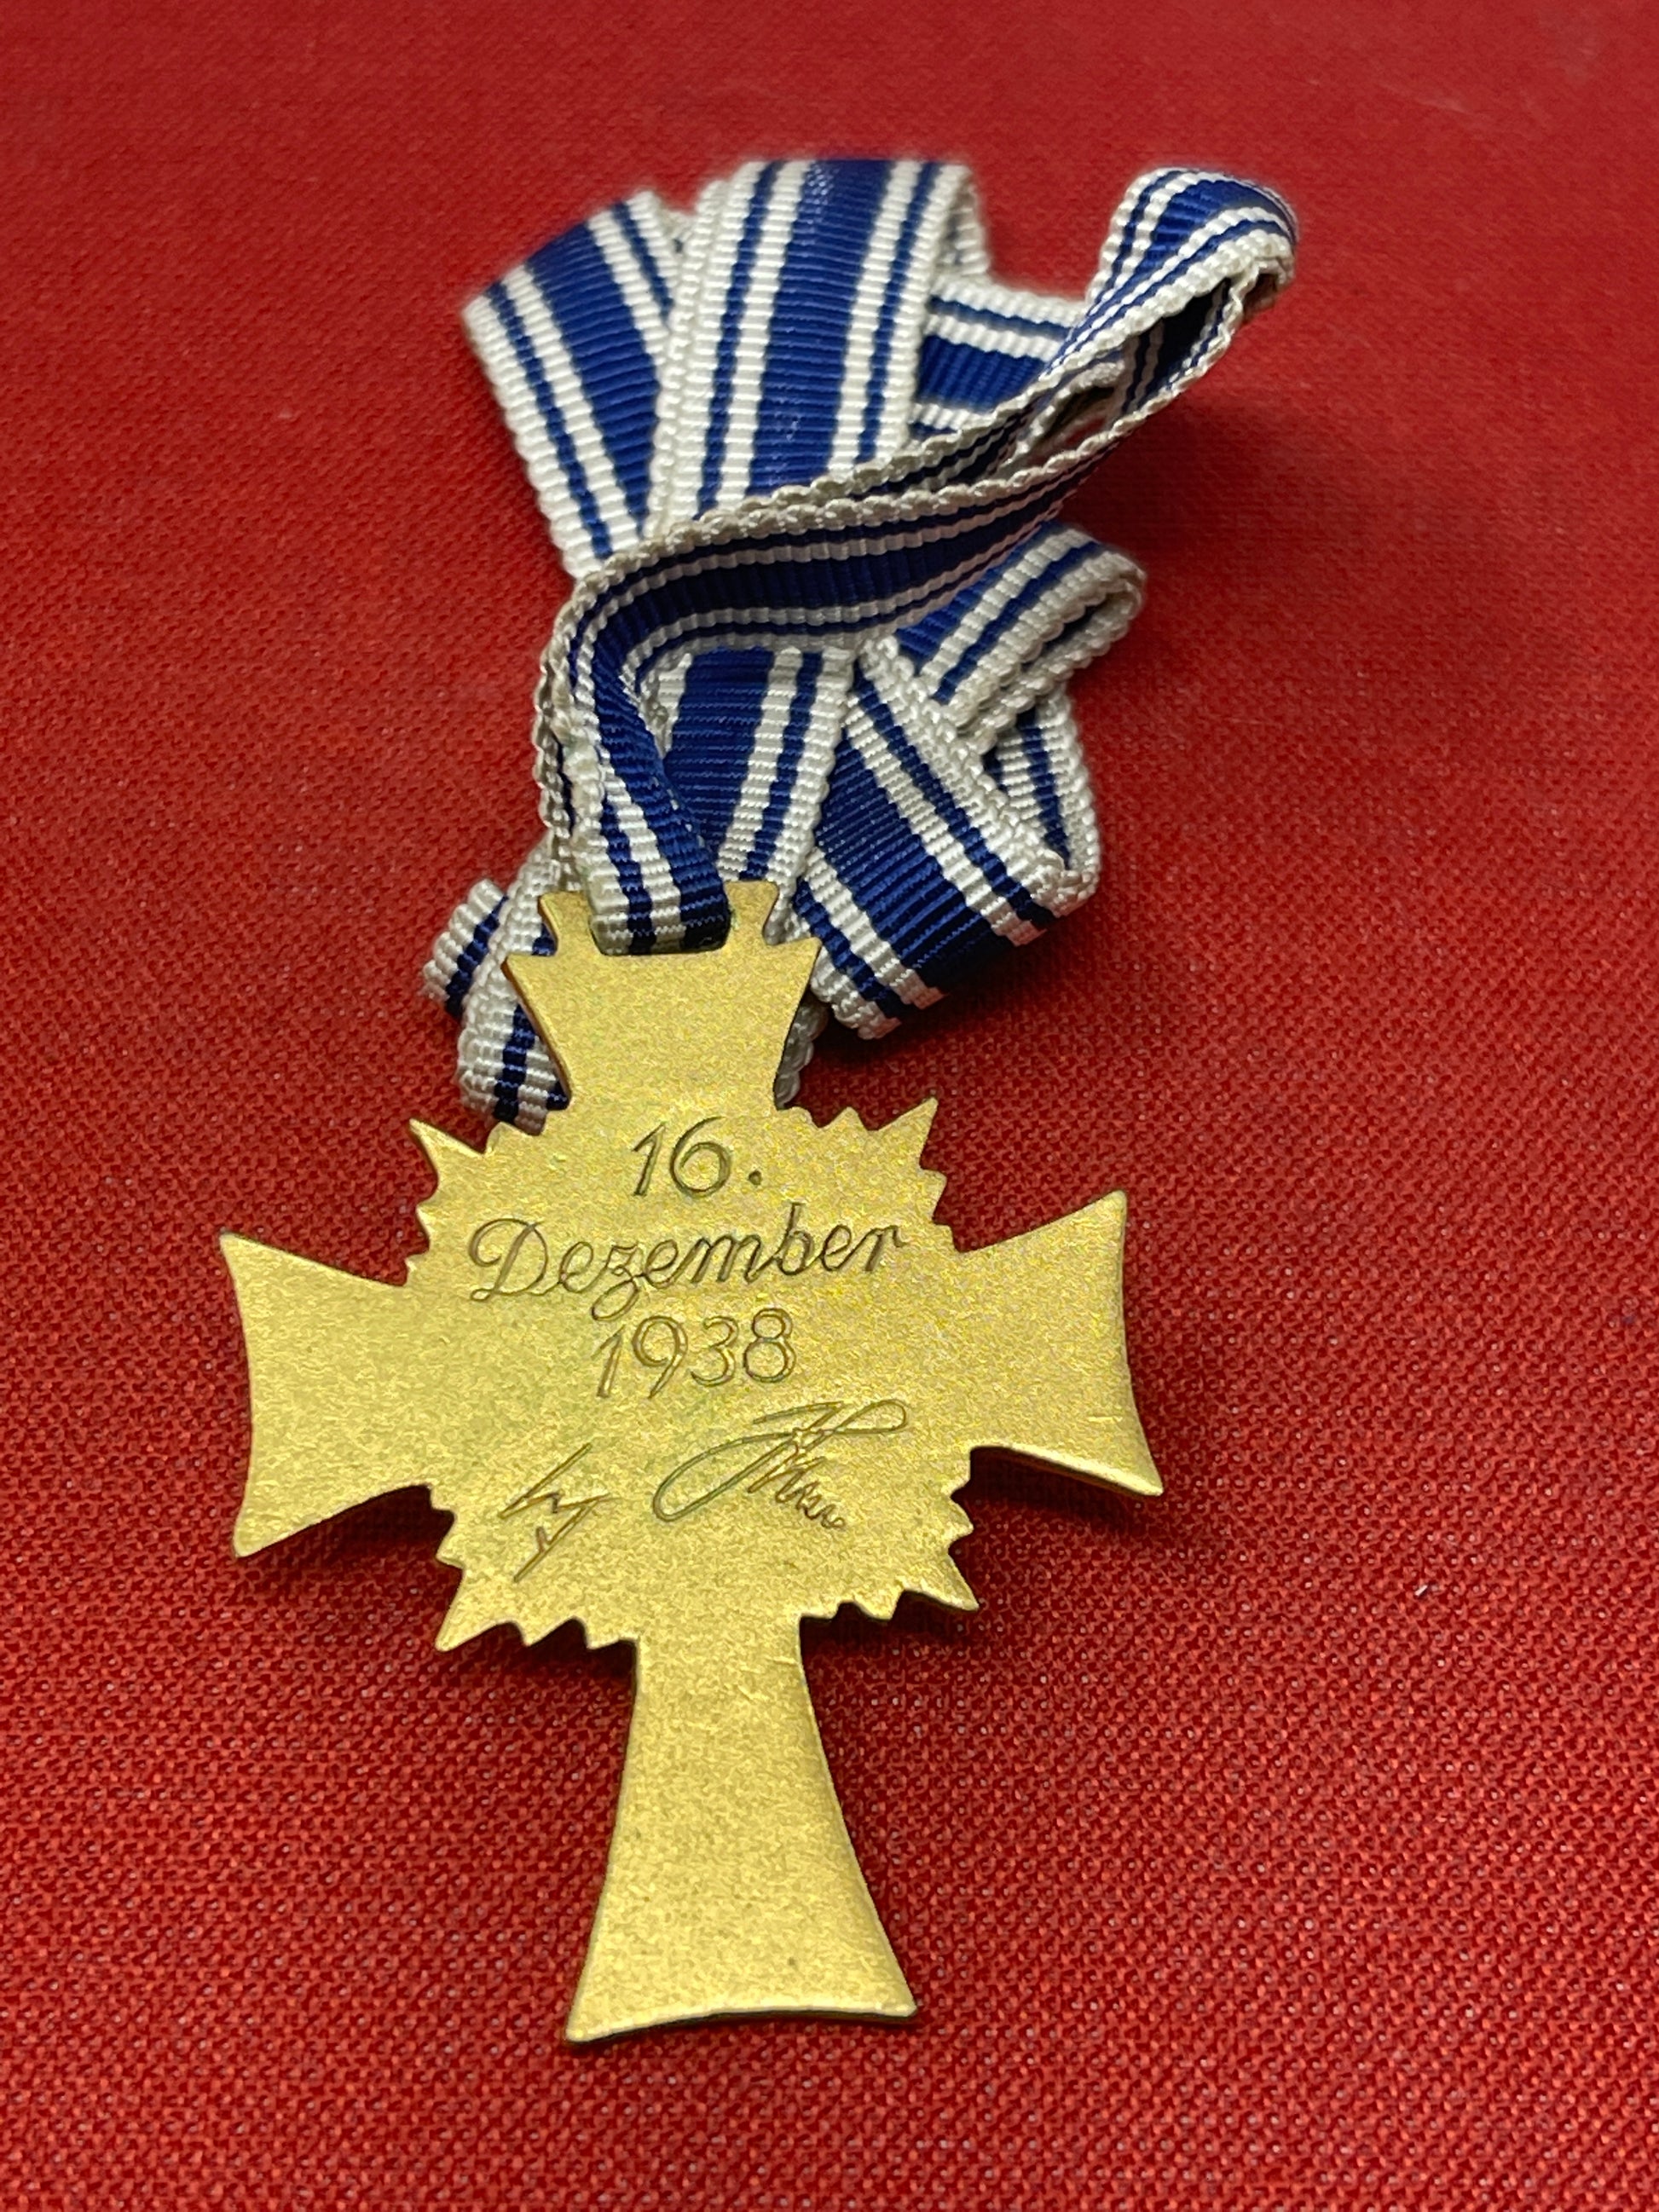 Cross of Honour of the German Mother